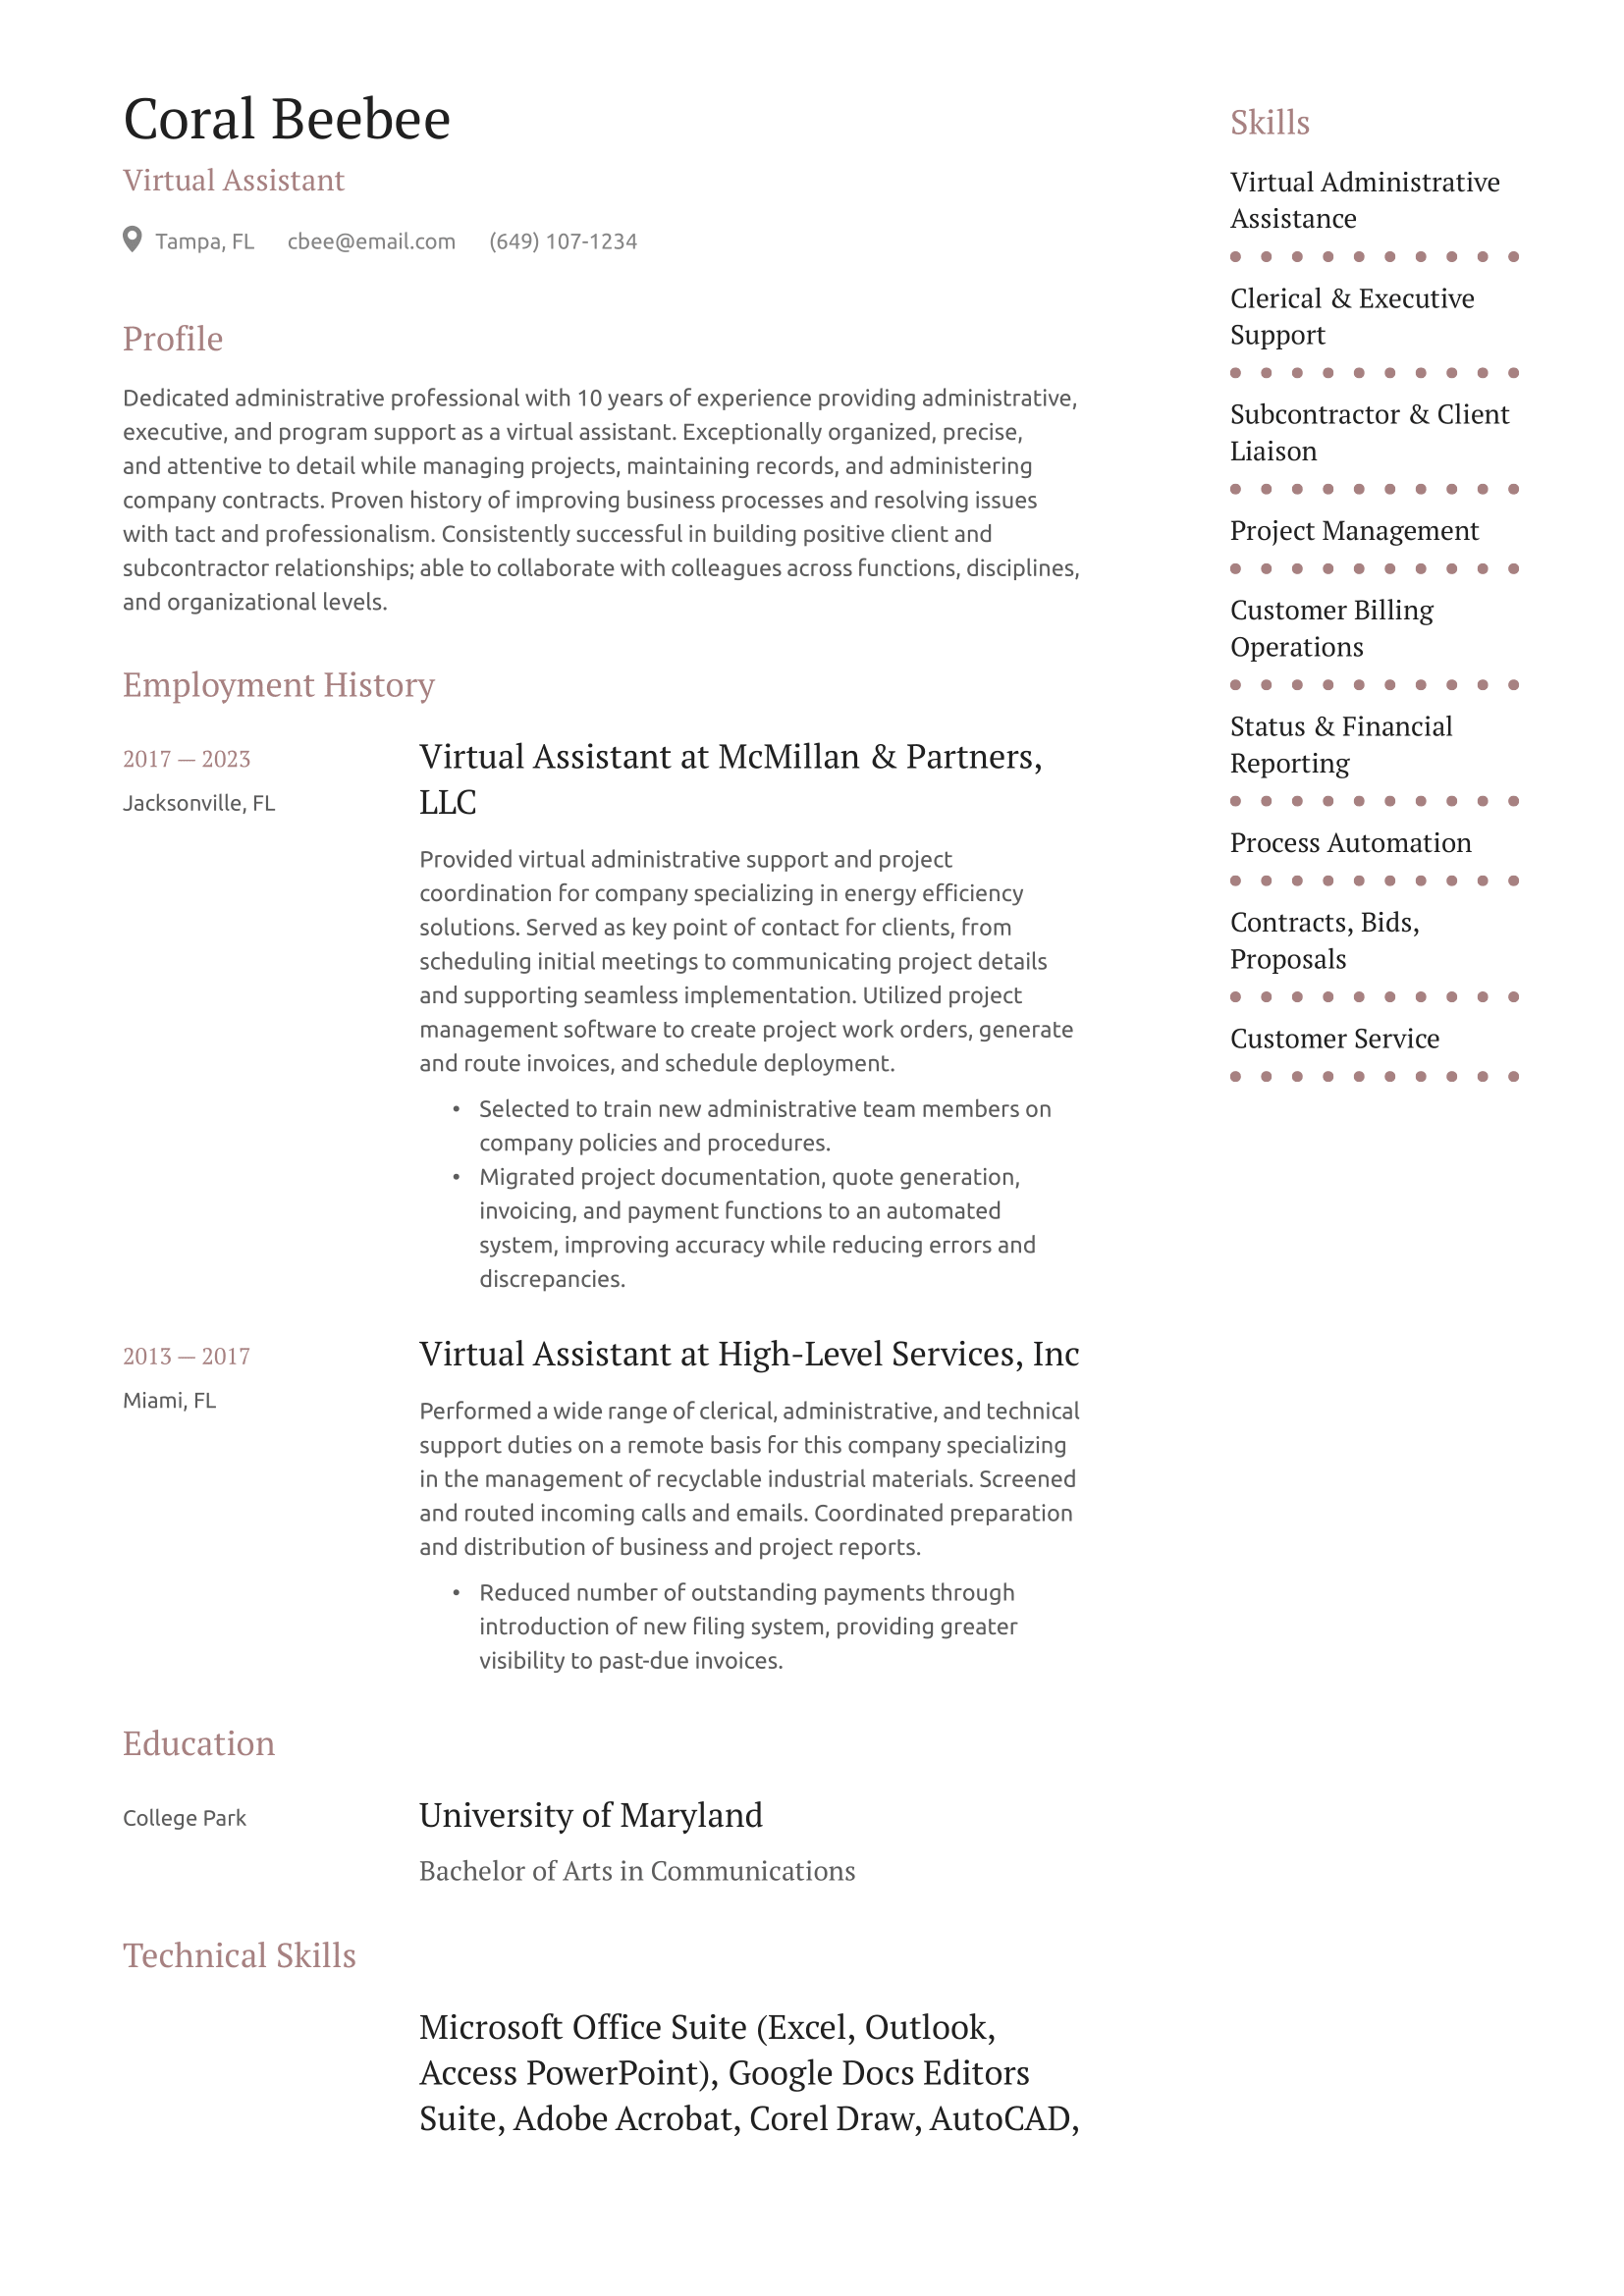 Virtual_Assistant-Resume-Example.png